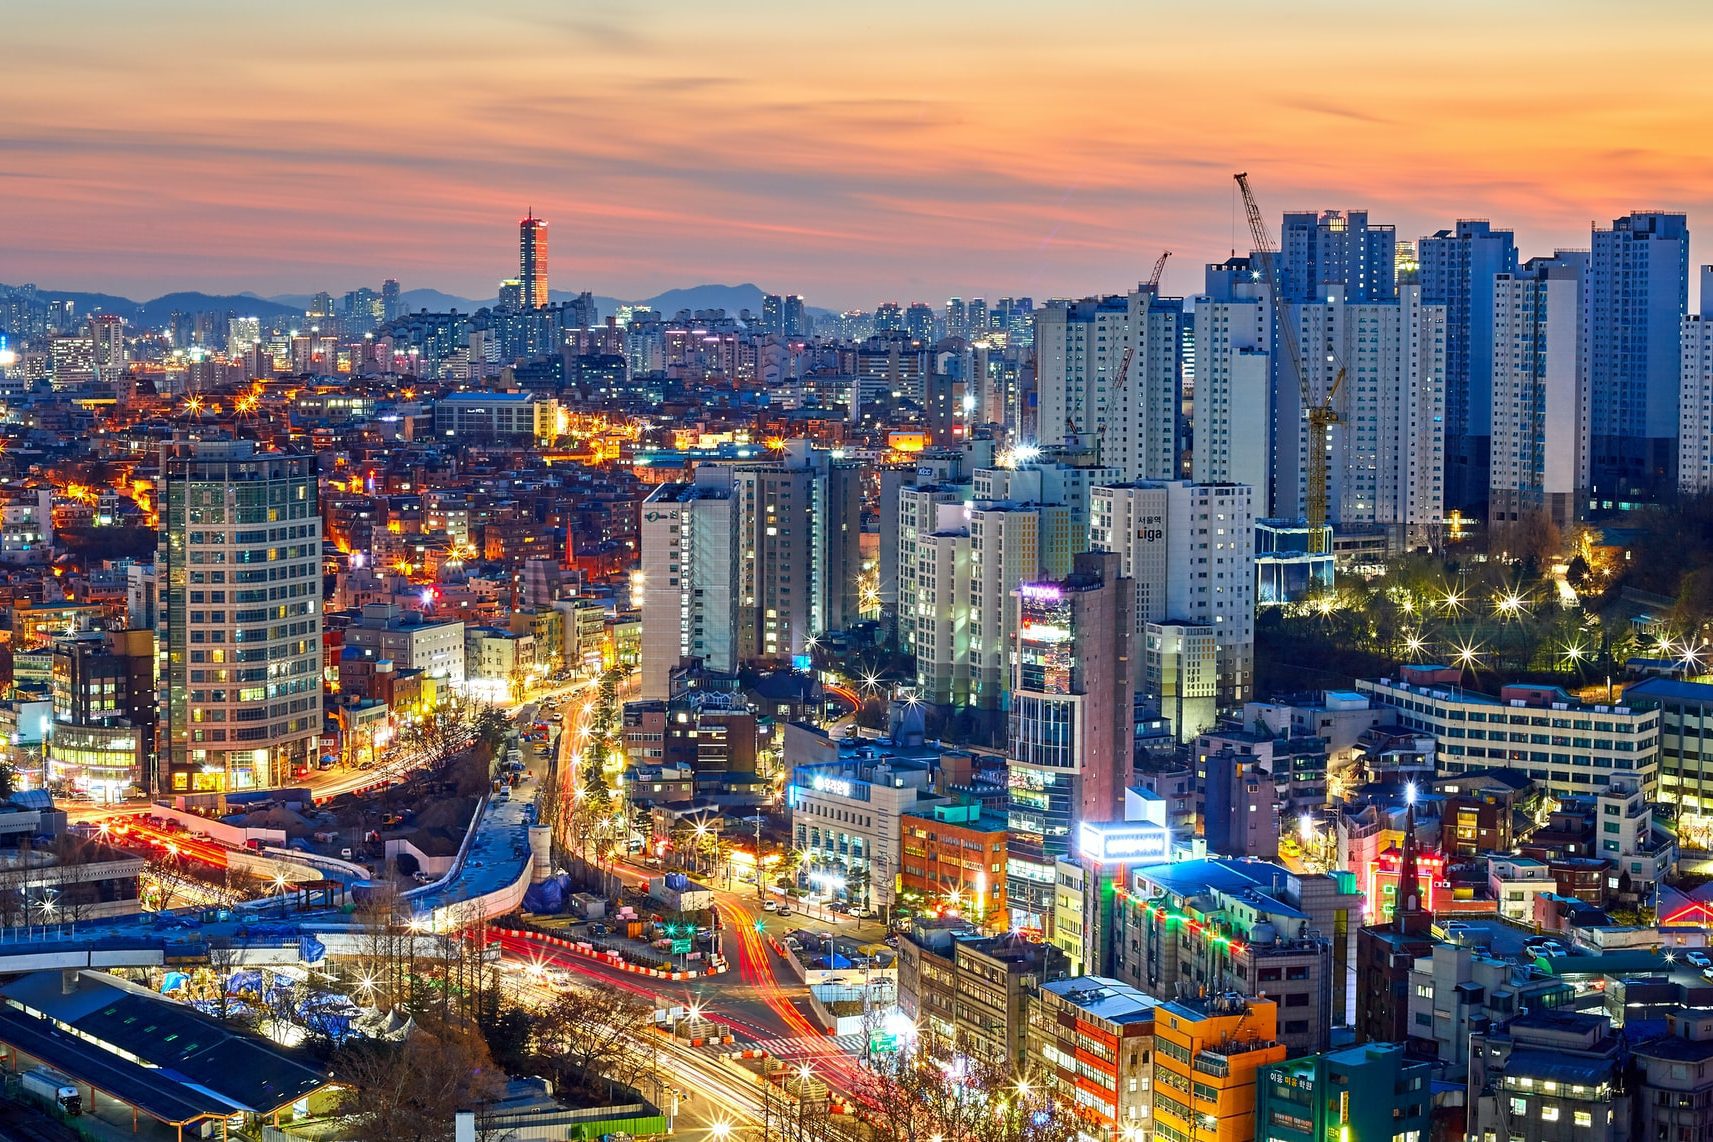 Seoul, South Korea. The spread of the virus has accelerated across the country, with the Delta variant now the dominant strain.